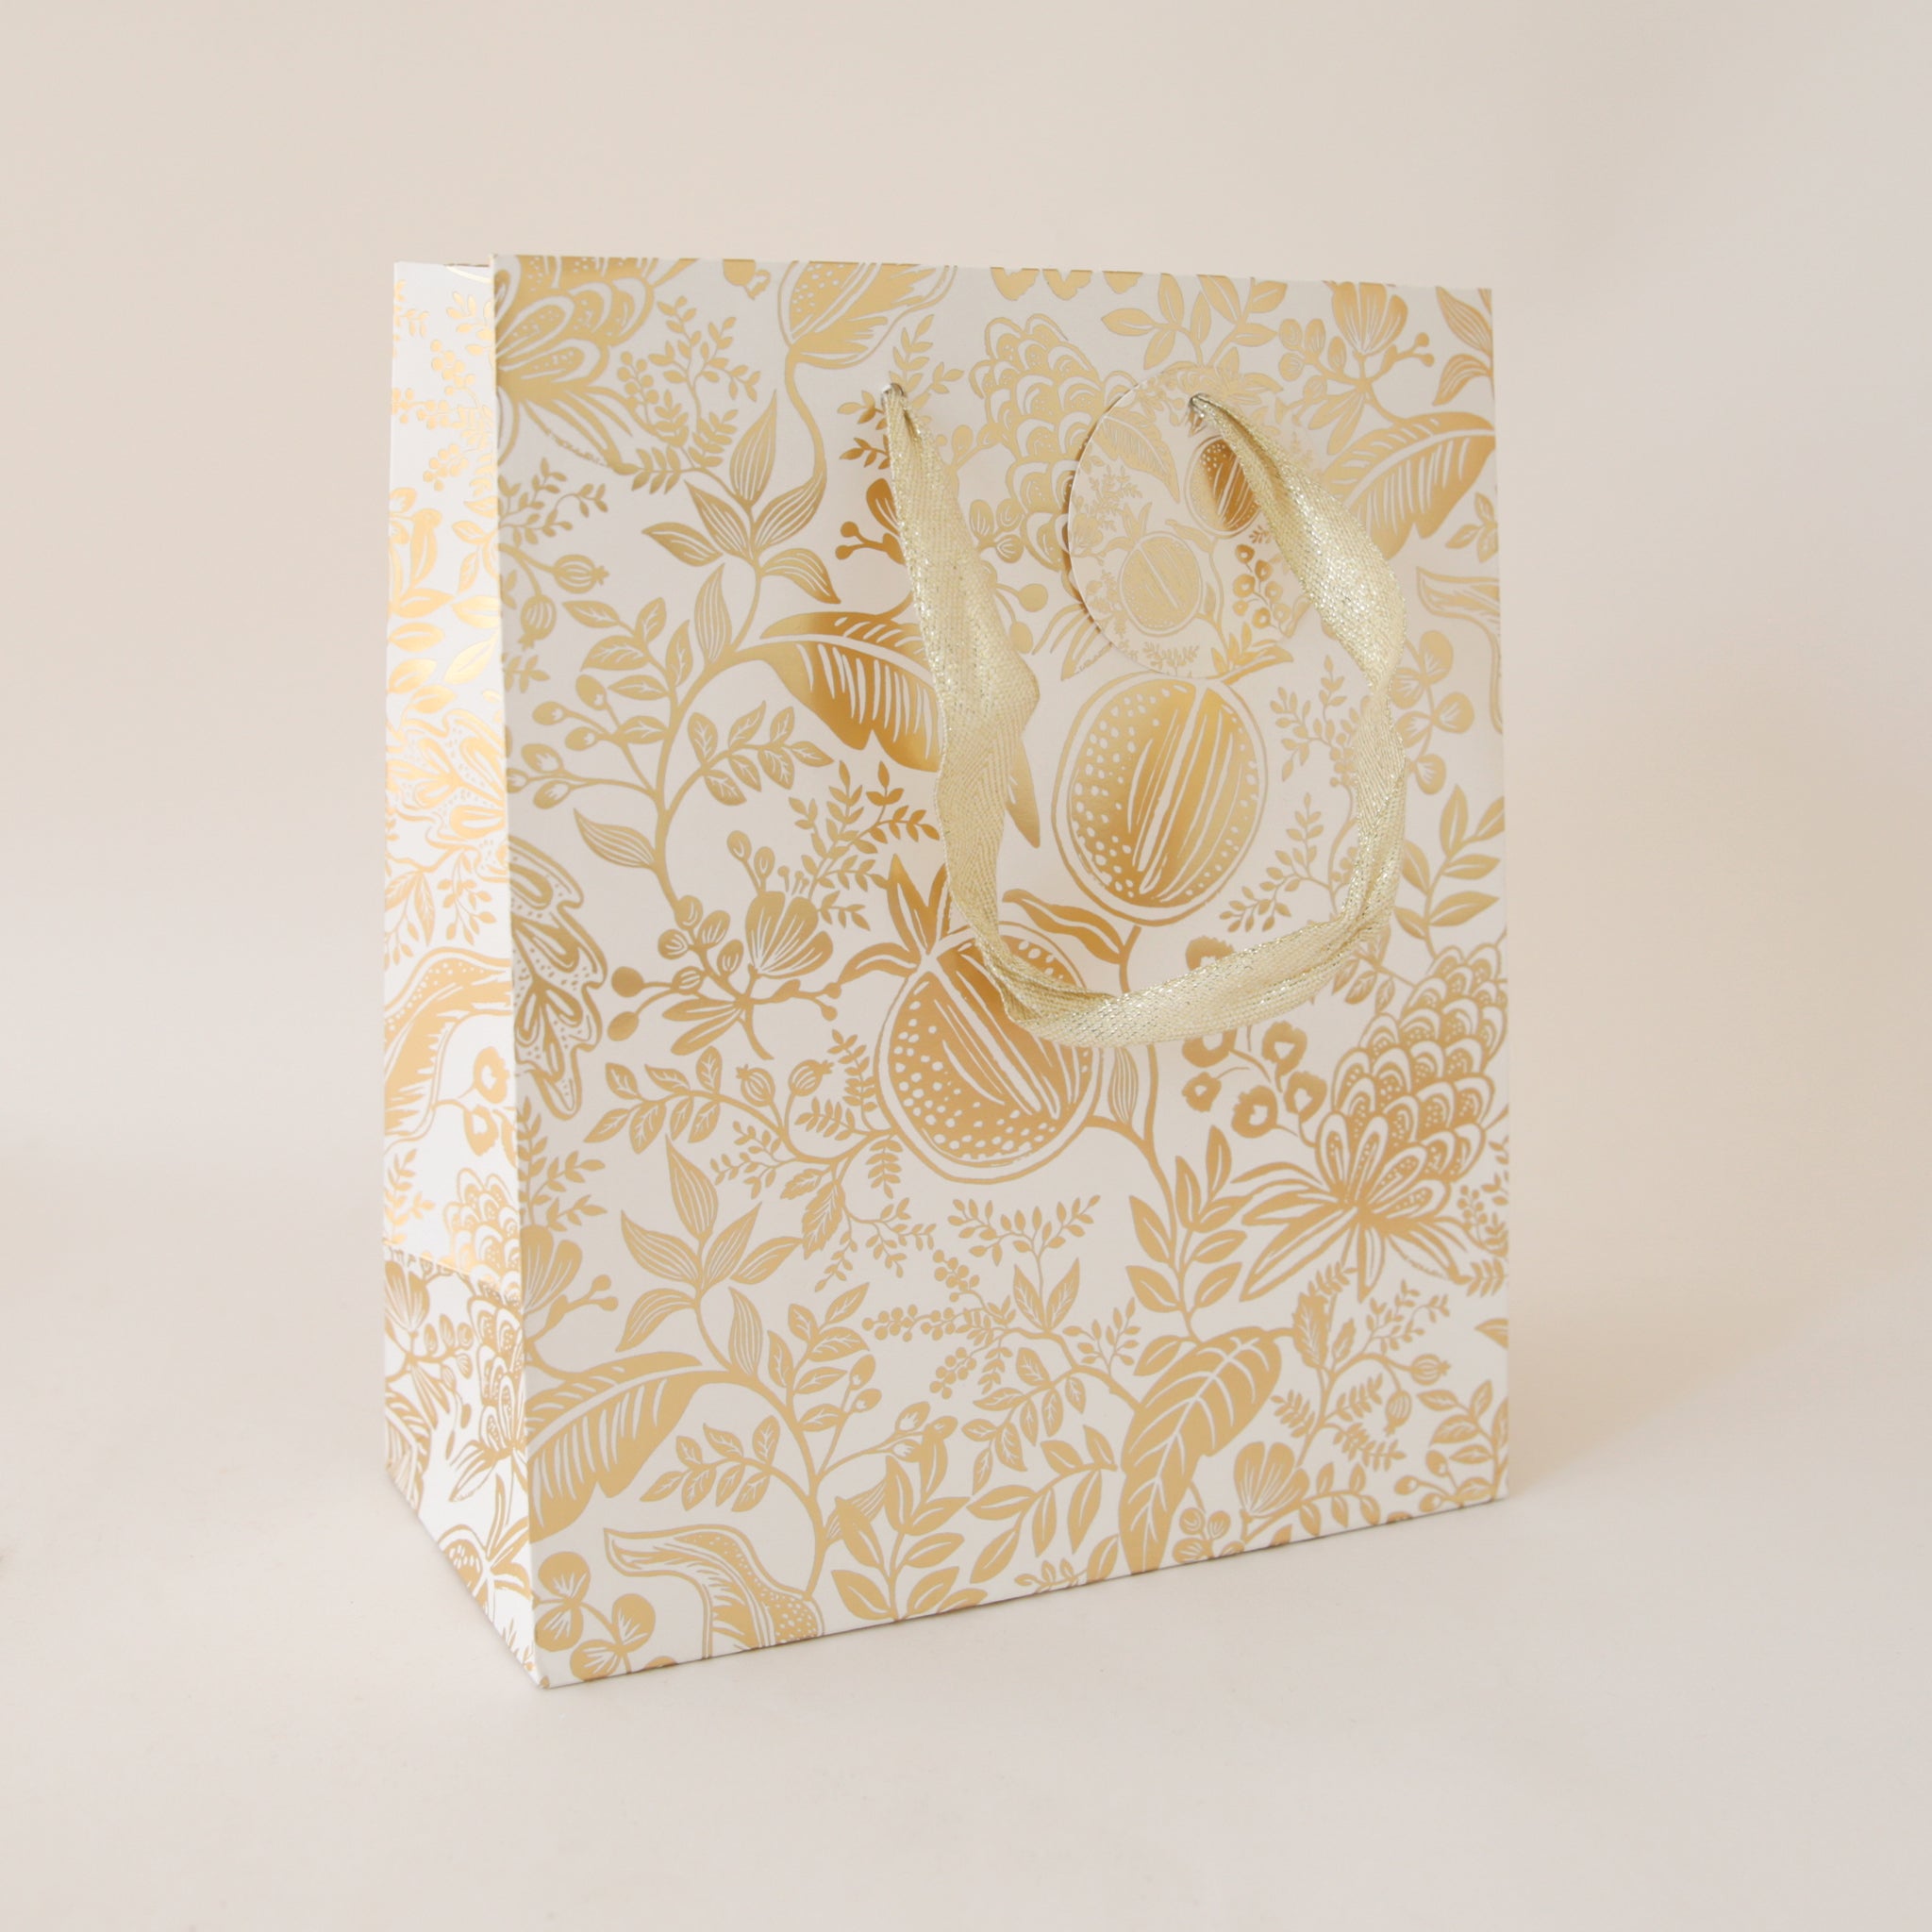 A 9.5" x 8" gold foiled gift bag with metallic cotton handles and a to and from tag.